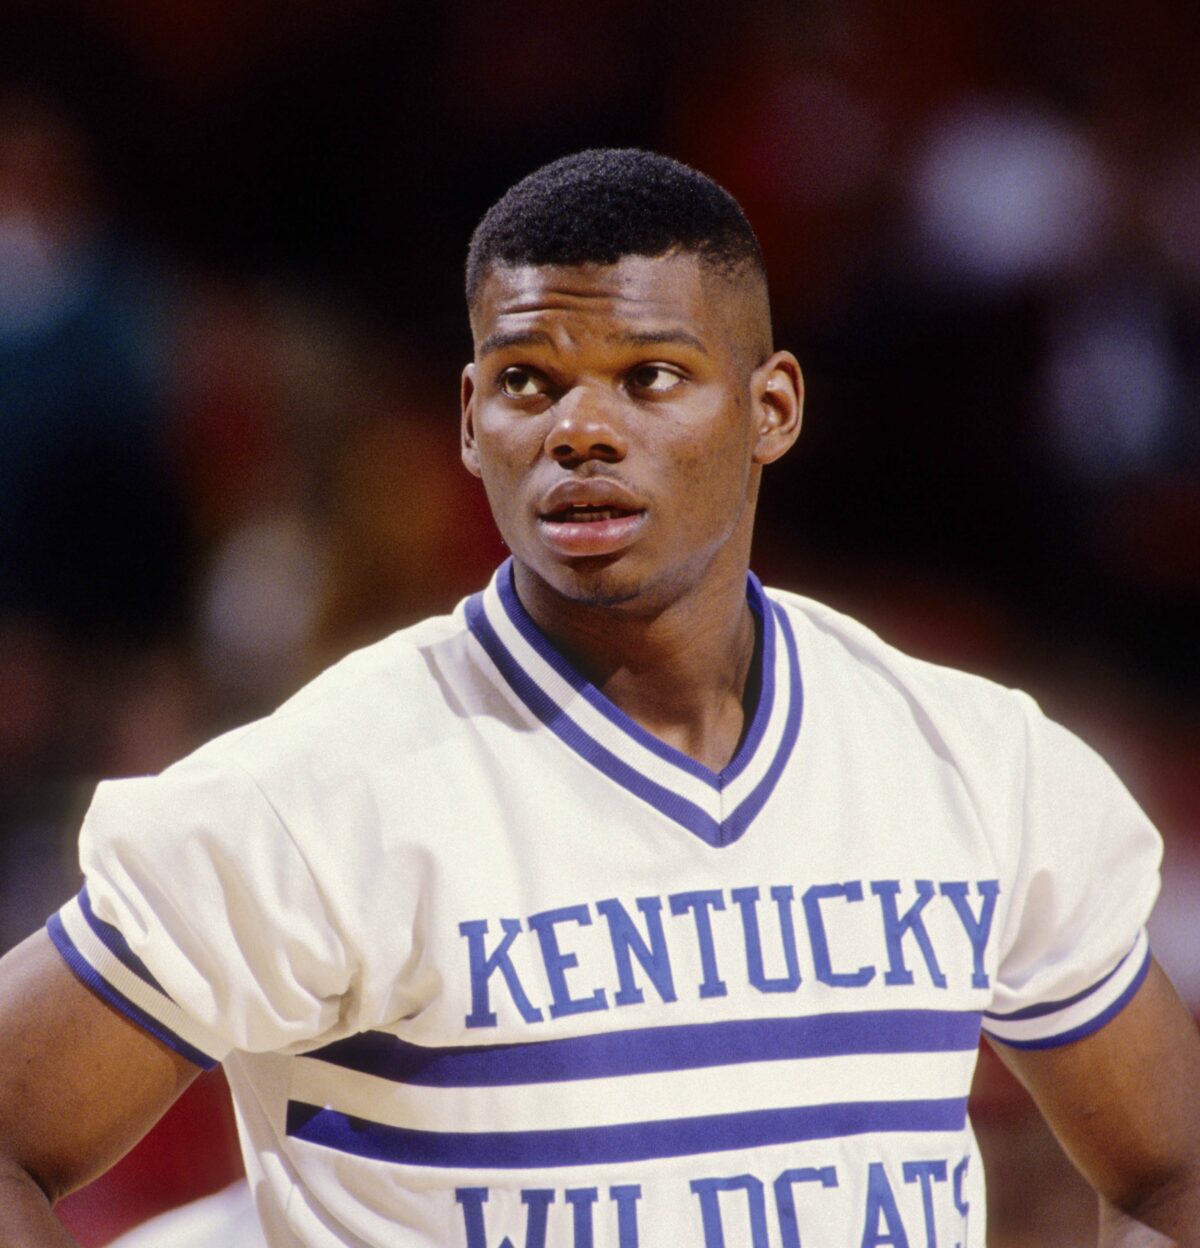 Who are the top former Kentucky players in NBA history?